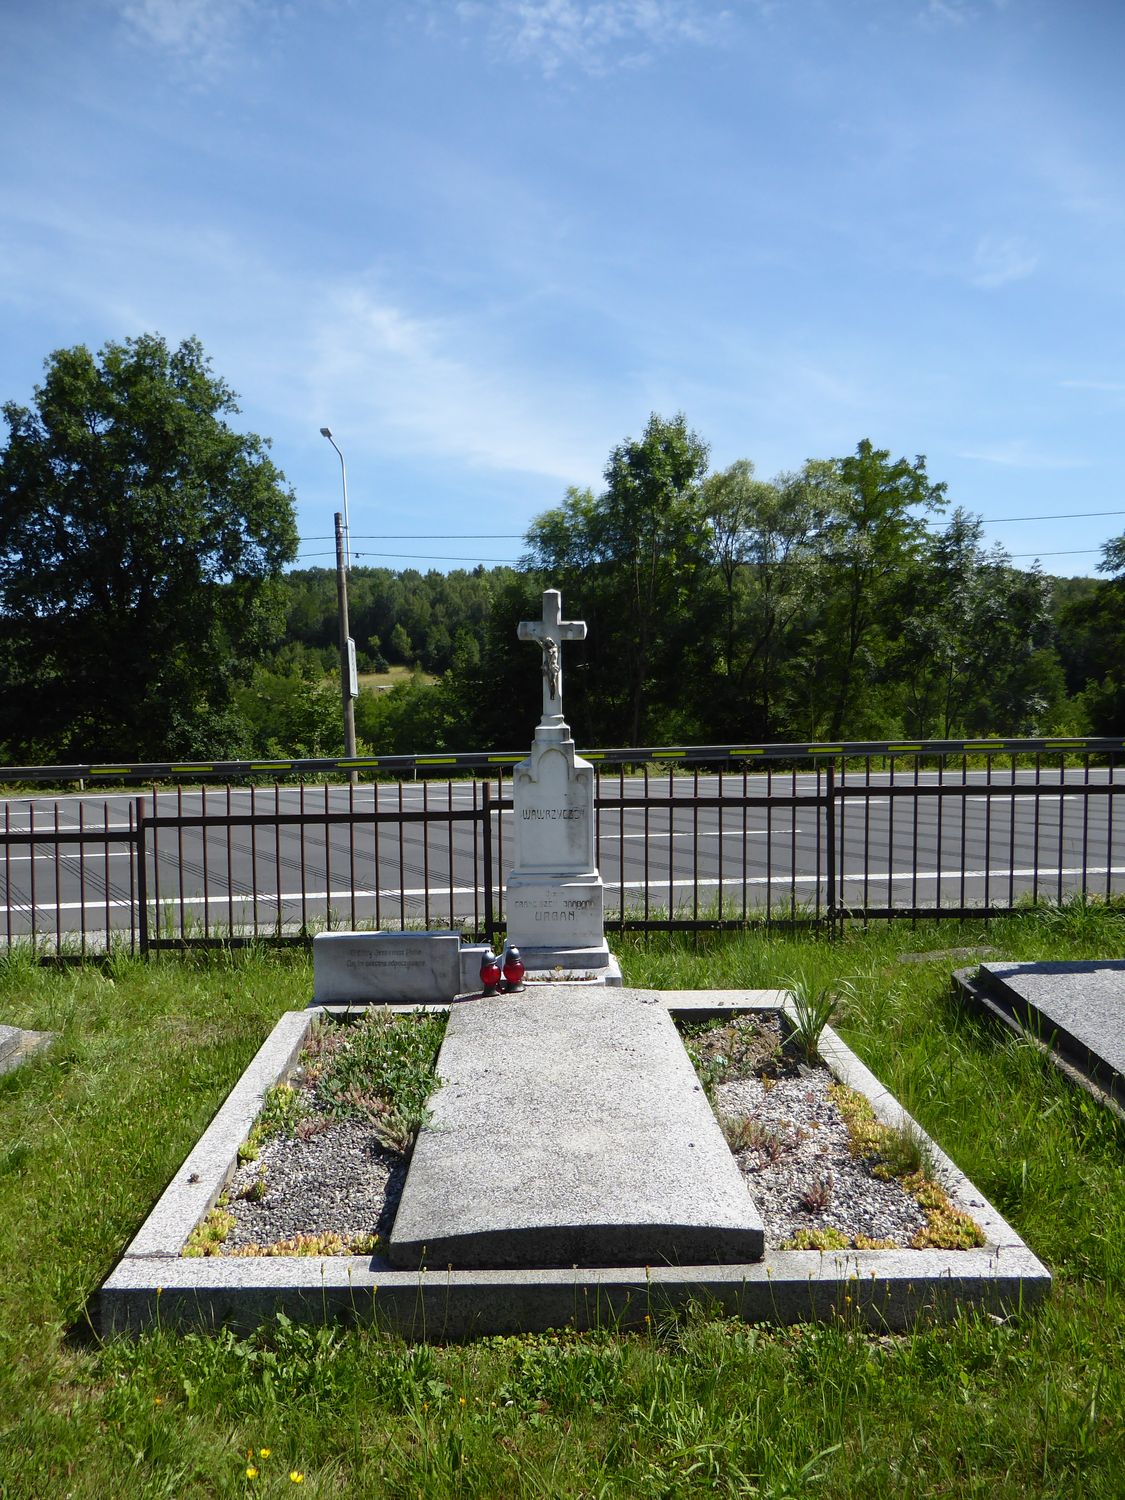 Fragment of the tombstone of Wawrzyczek, František and Barbara Urban from the cemetery of the Czech part of Těšín Silesia, as of 2022.